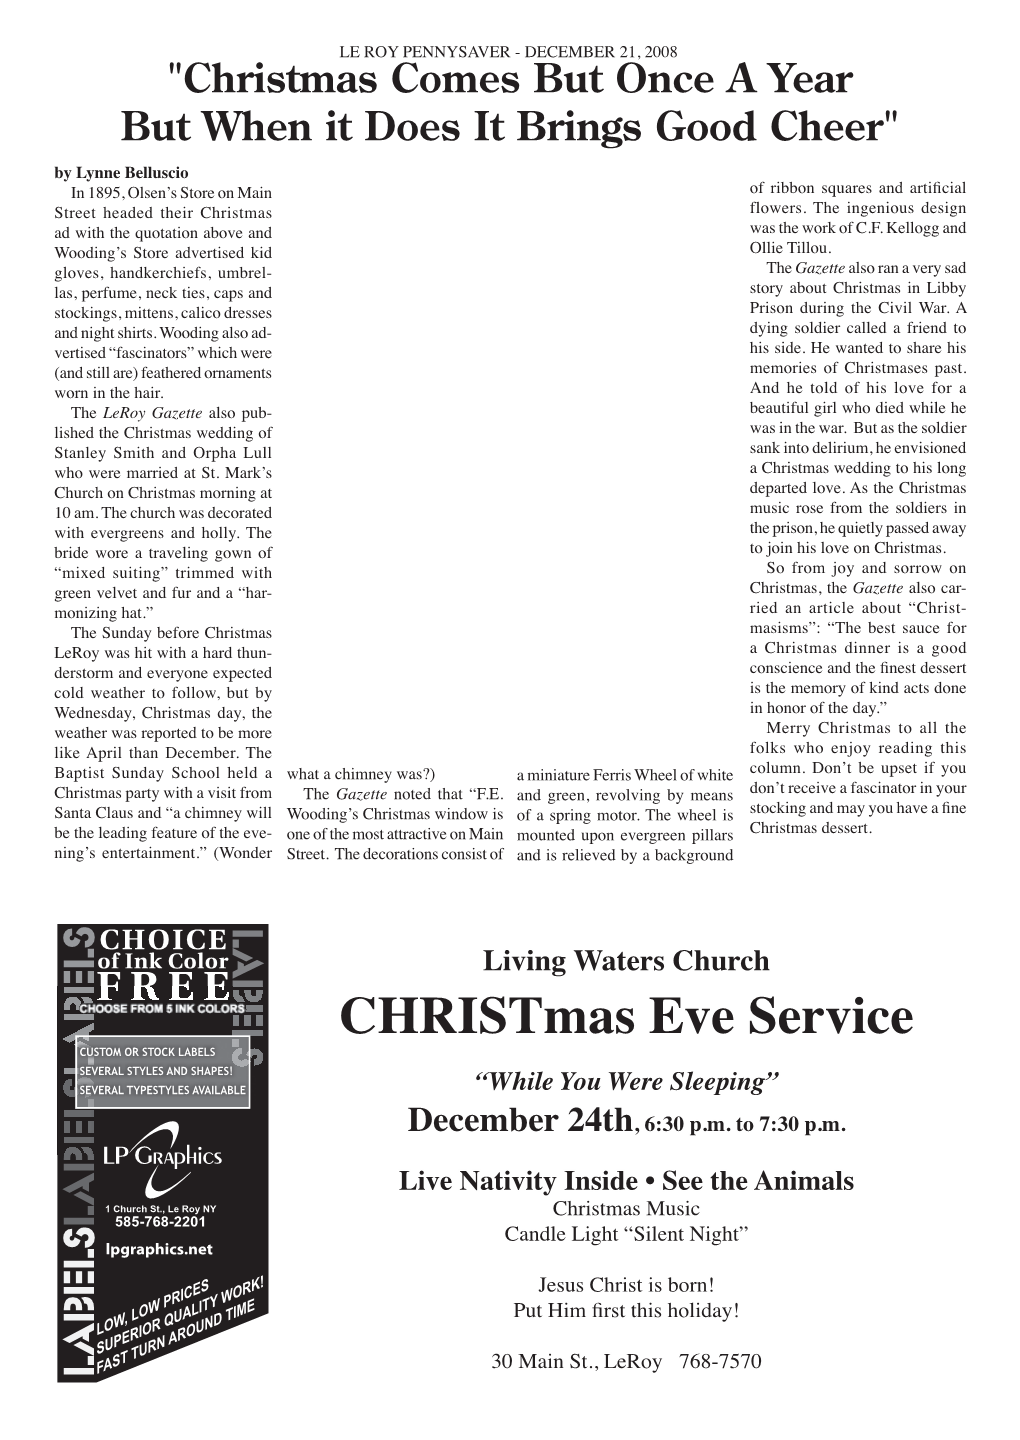 Christmas Eve Service “While You Were Sleeping” December 24Th, 6:30 P.M